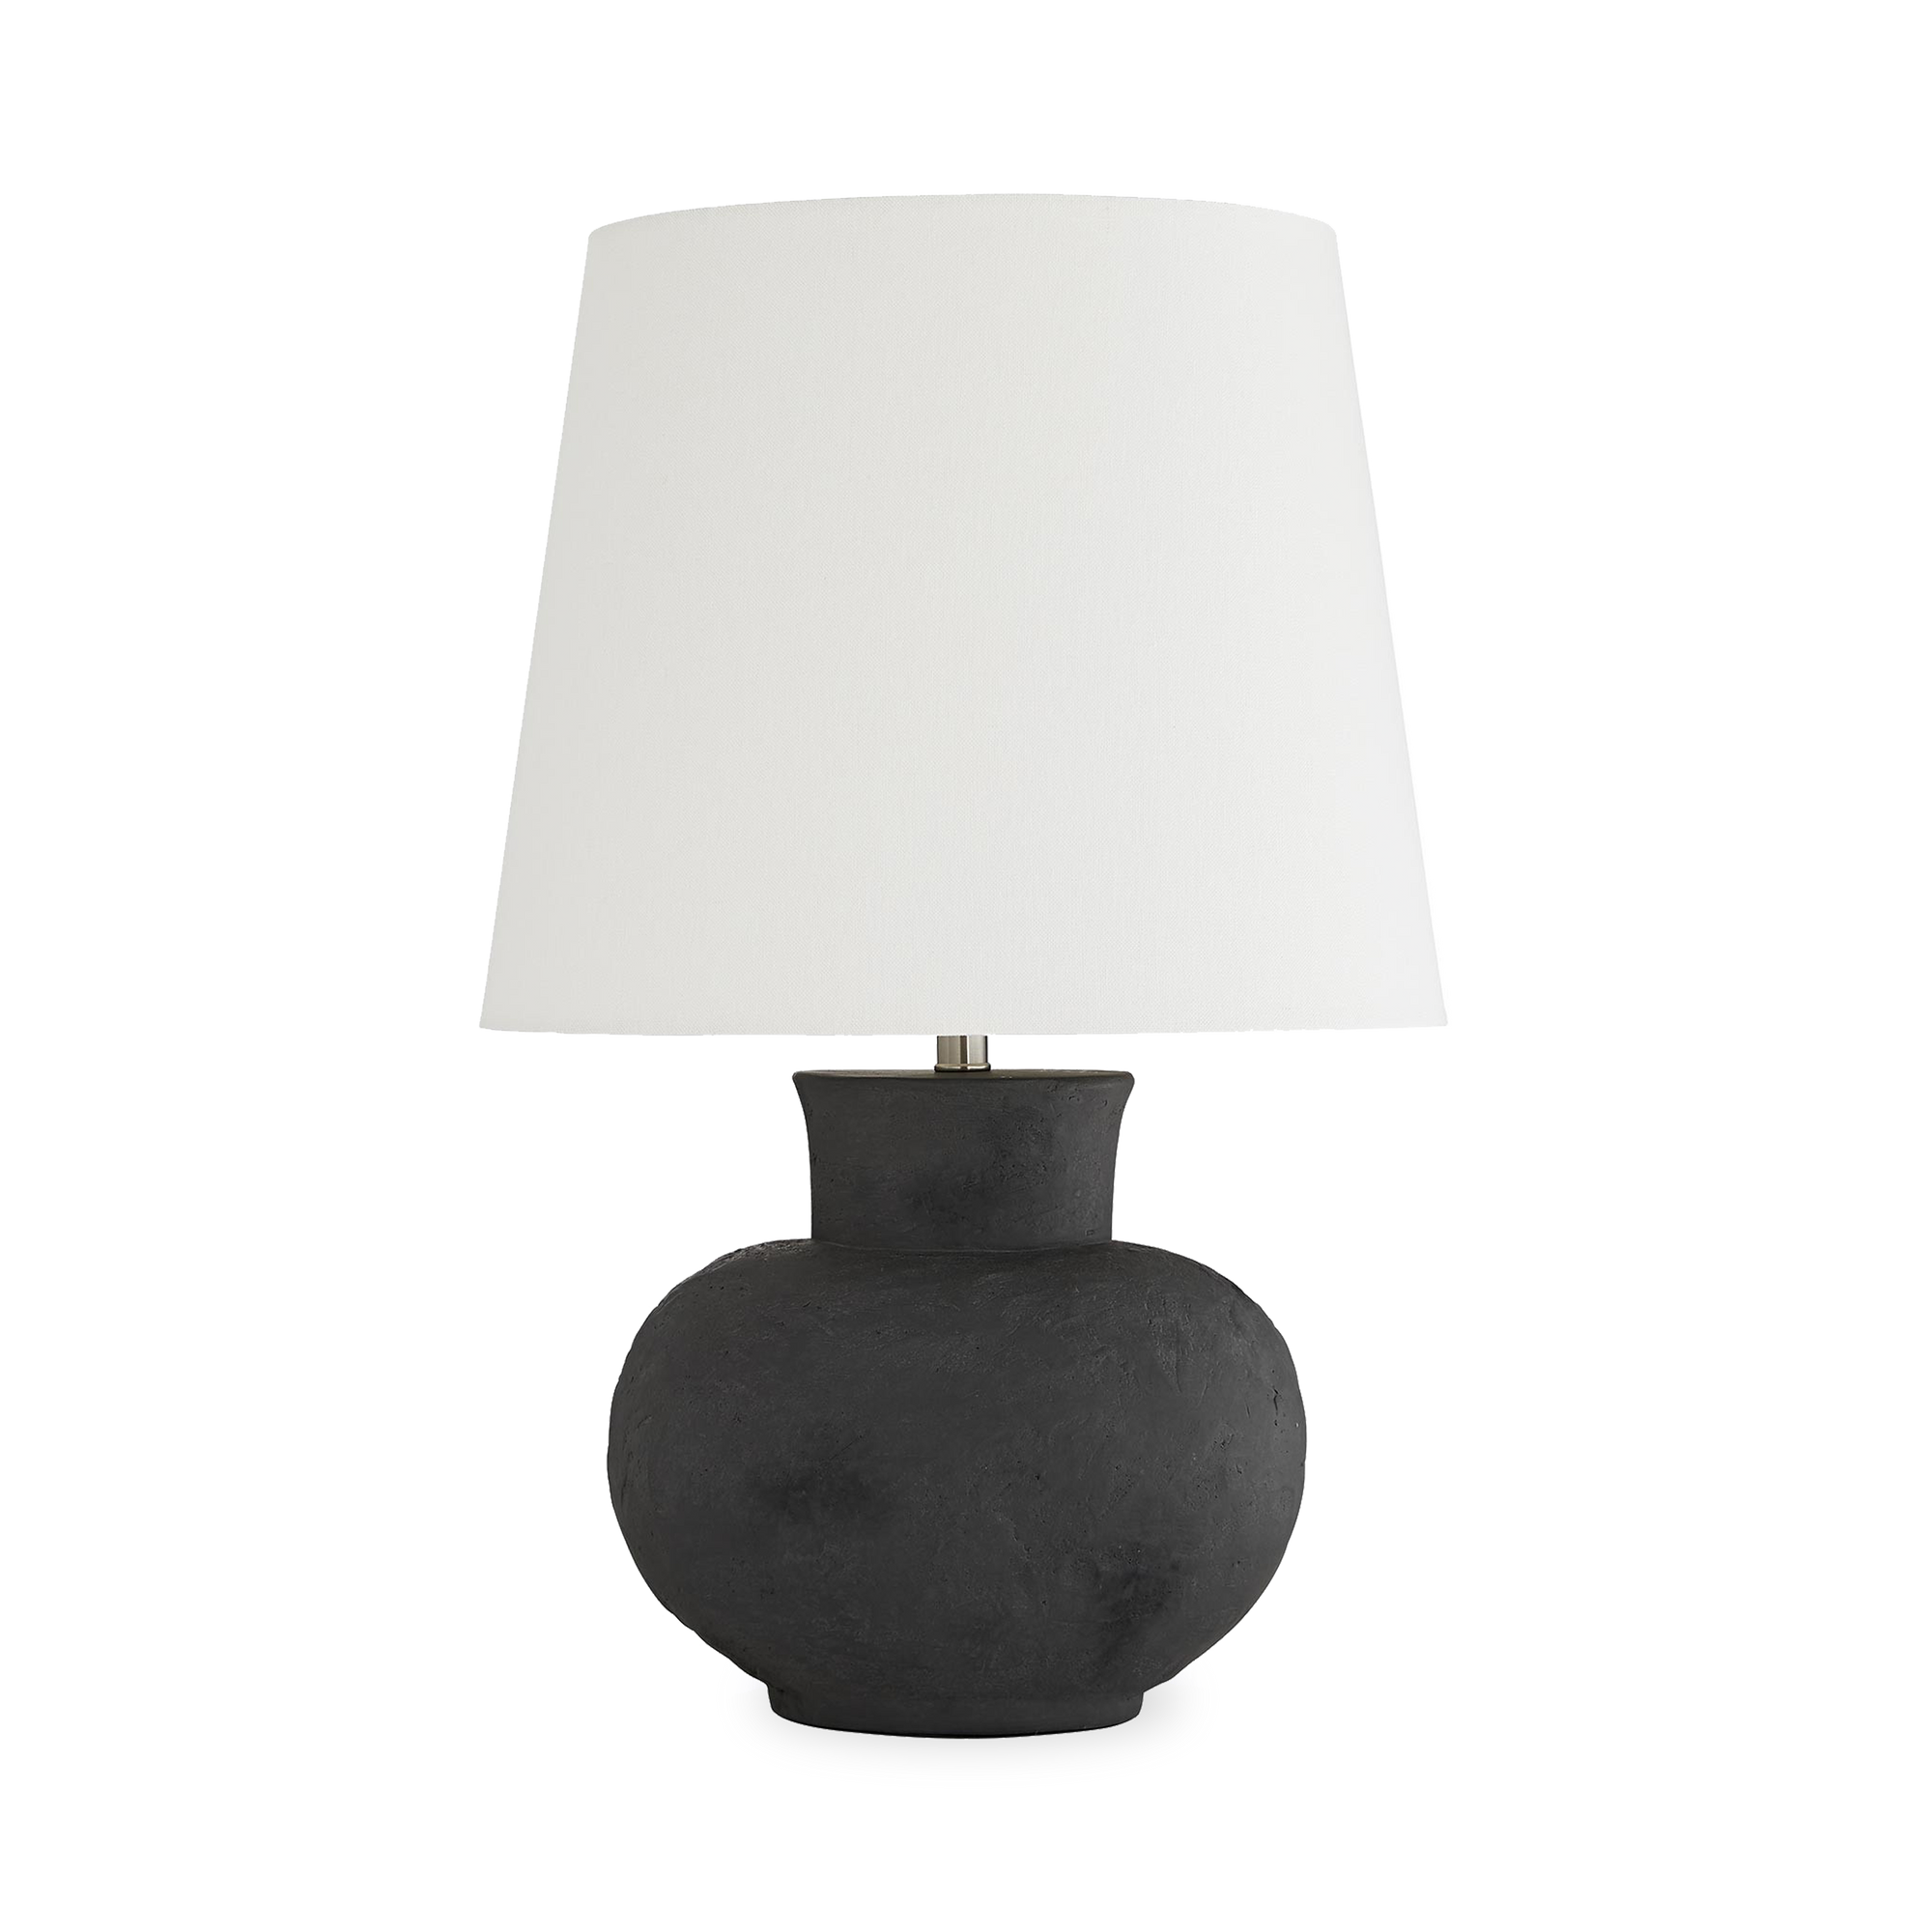 The stout stature and moody hue of this lamp delivers a distinct and dynamic element to a space.